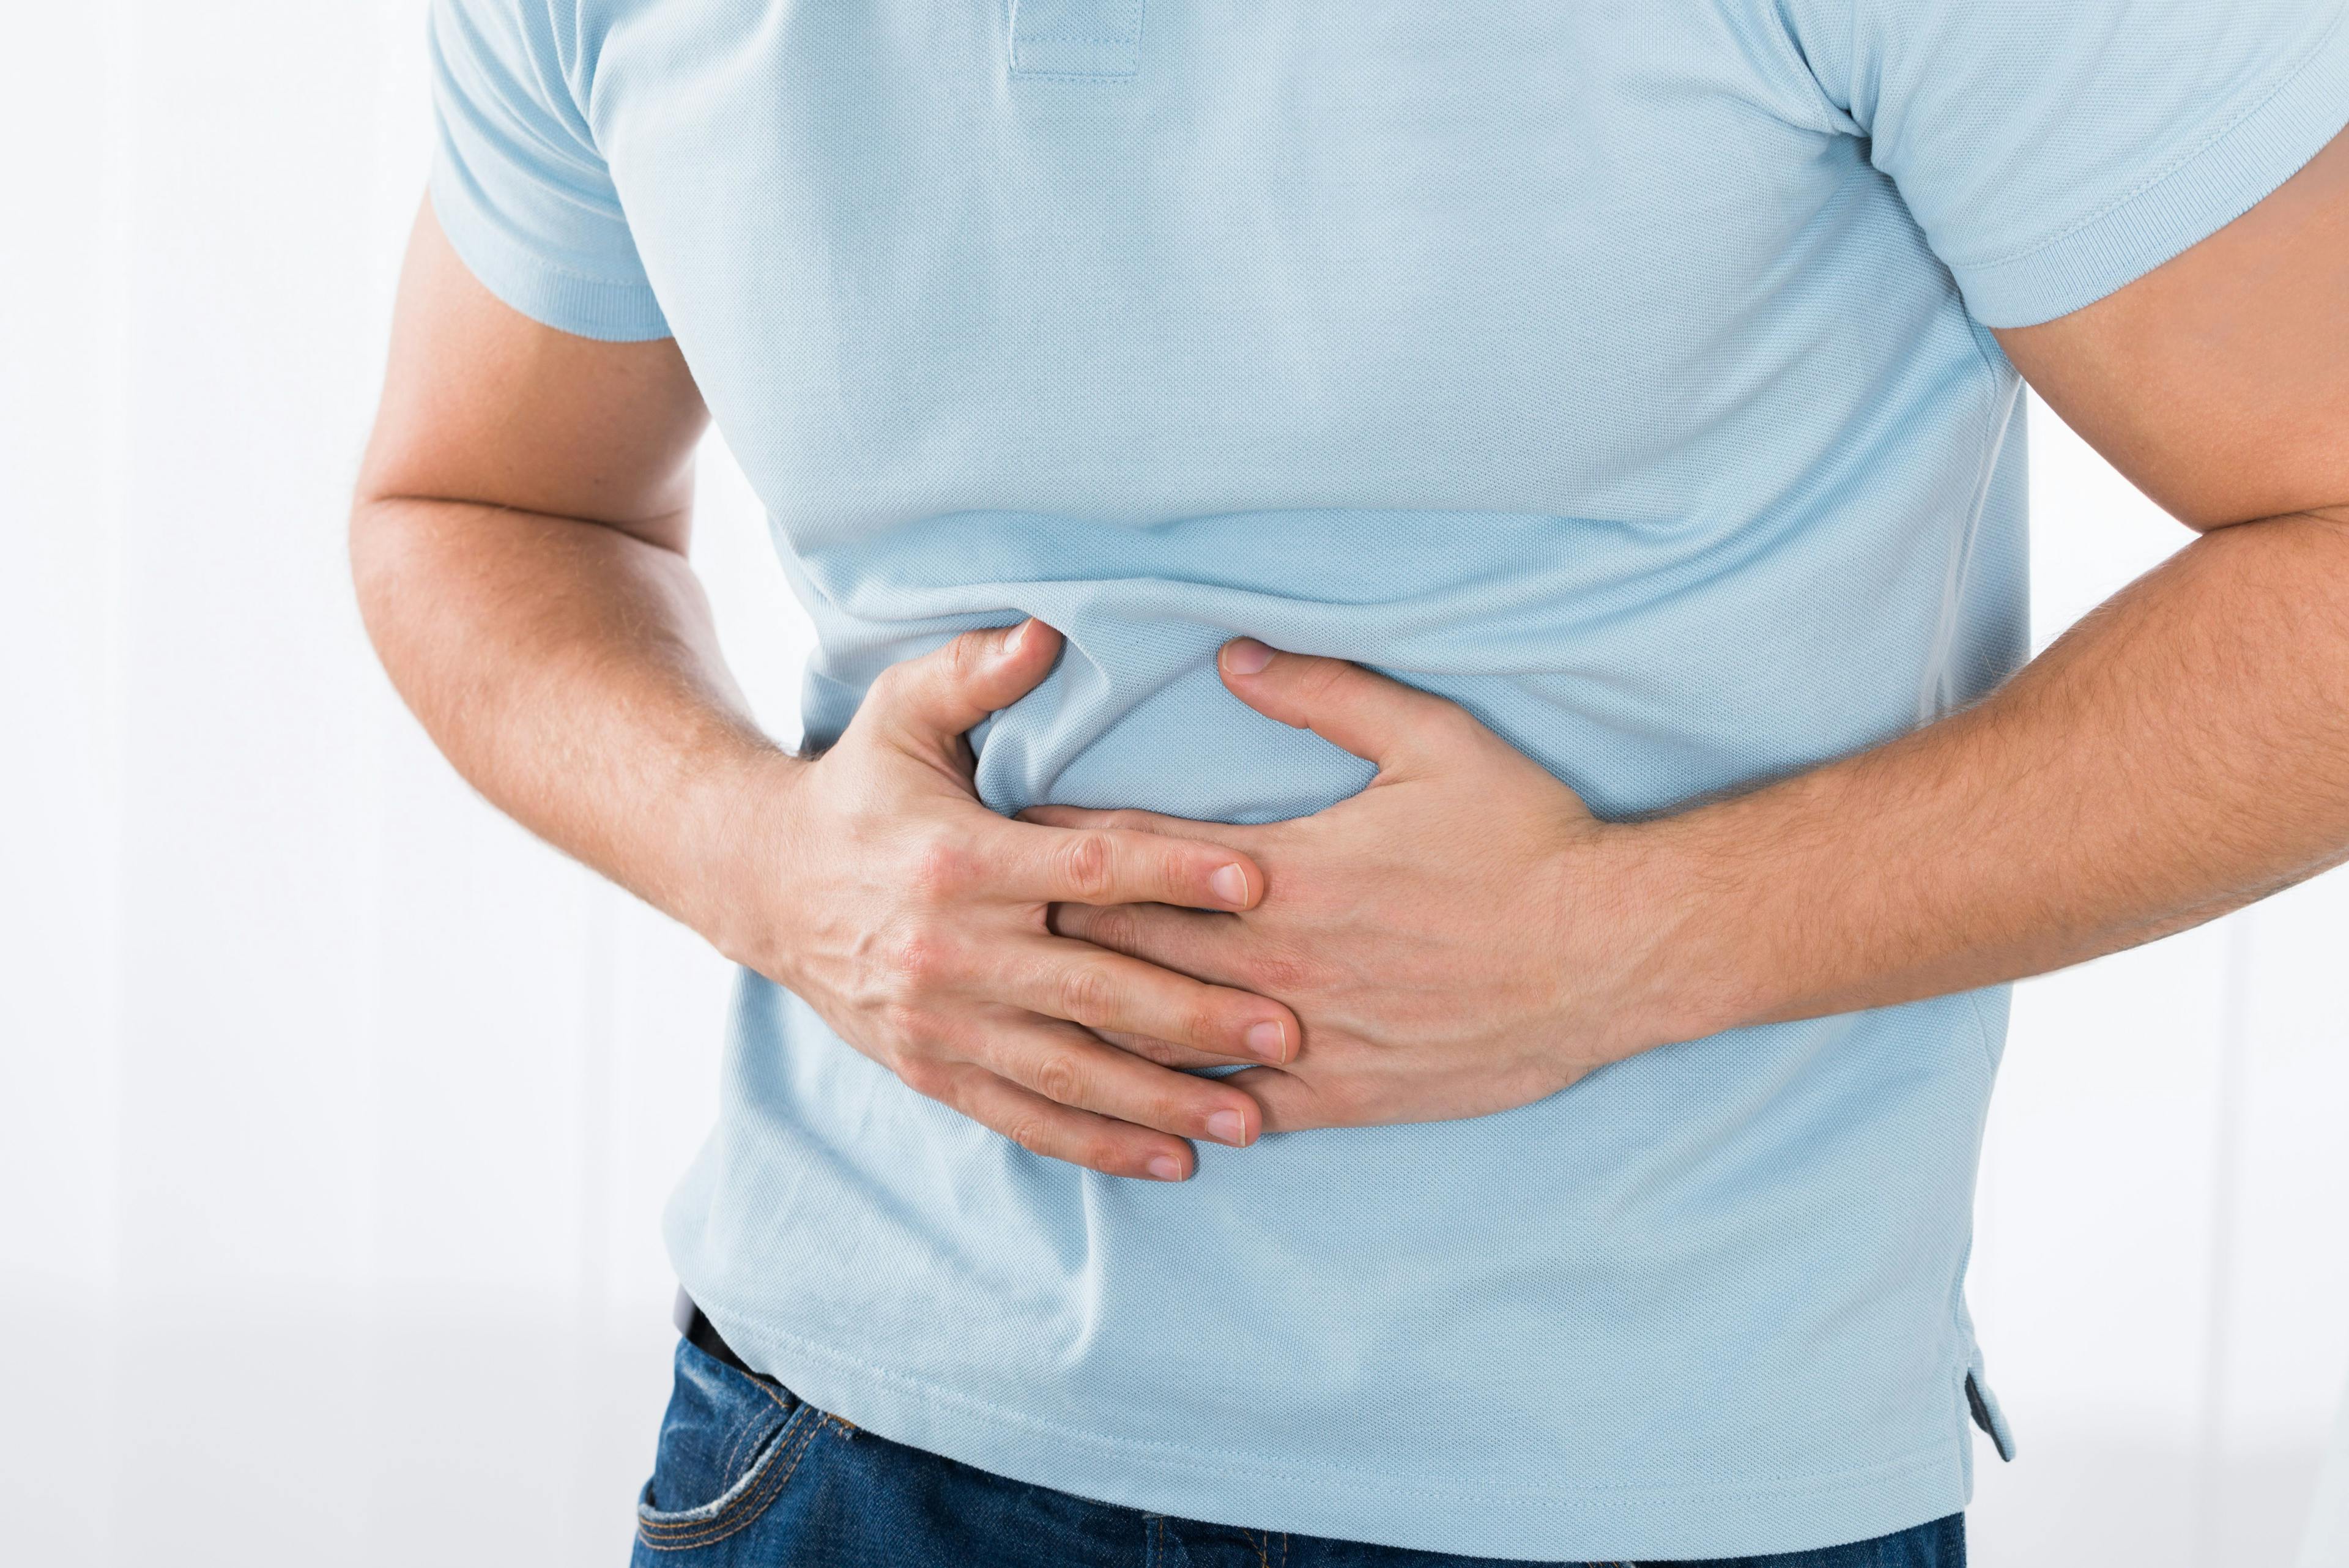 POLL: Have you experienced GI-related Covid symptoms?